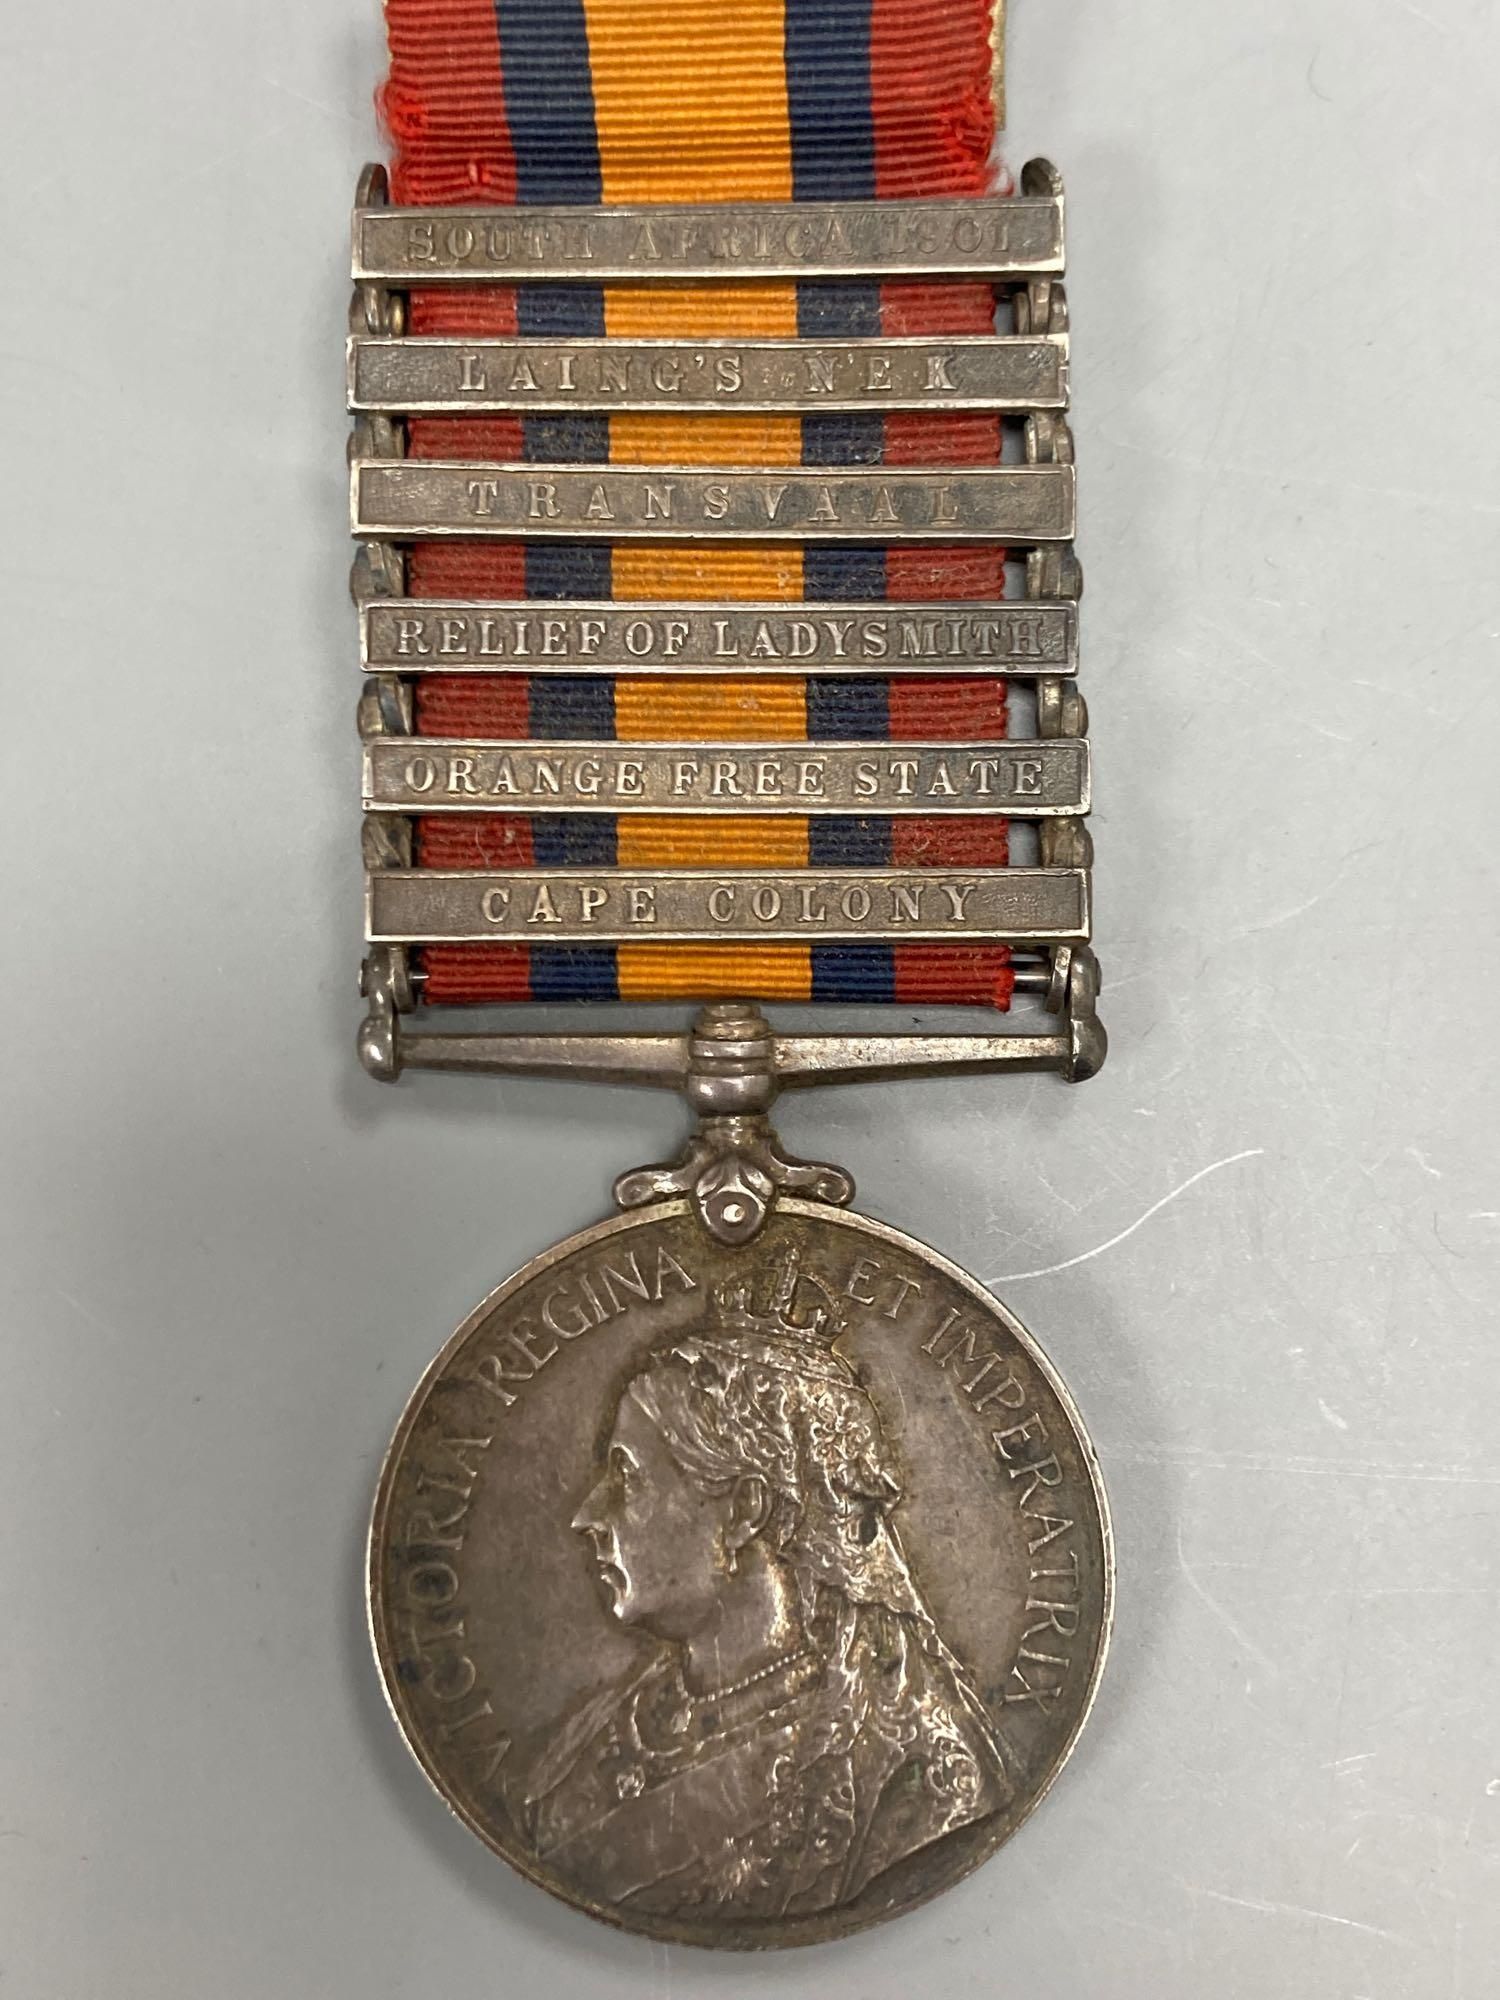 Sutlej Medal 1846 with clasp ‘SOBRAON’ to En L. Munro 43rd N.I. and Queens South Africa medal with 6 clasps to Major L. Monro [sic], H